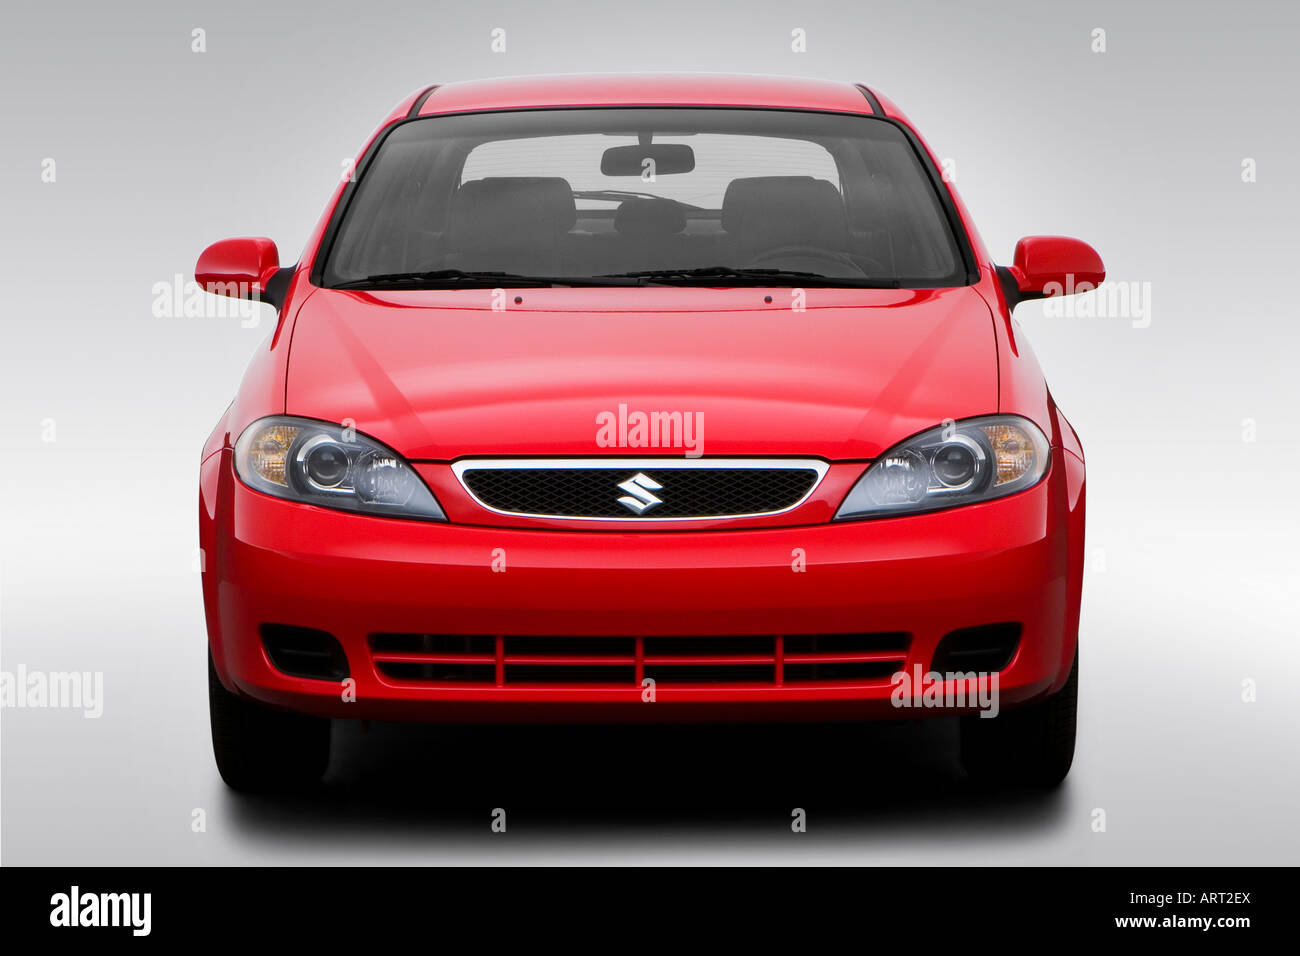 2008 Suzuki Reno in Red - Low/Wide Front Stock Photo - Alamy